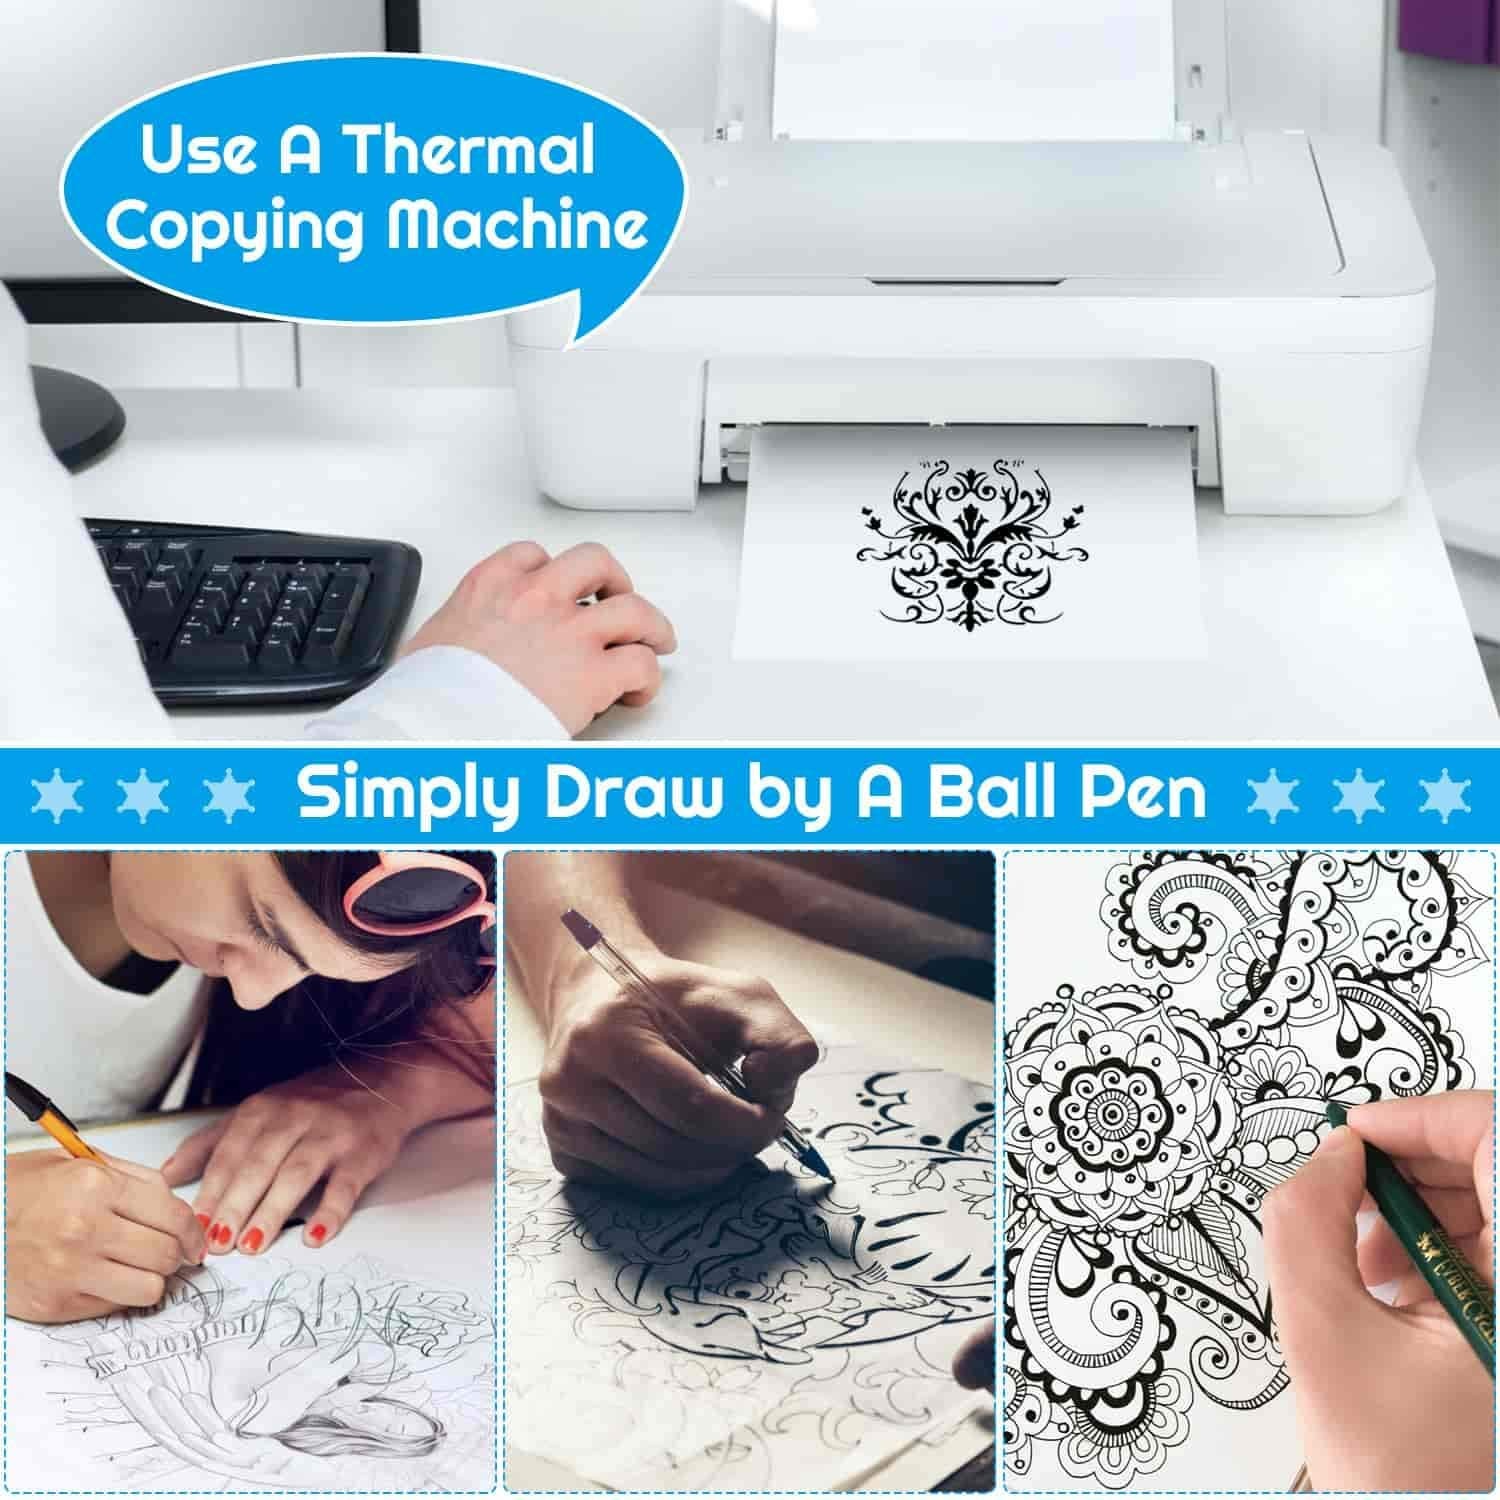 How to use tattoo transfer paper for tattoos with Photos. With or without a  thermal copier